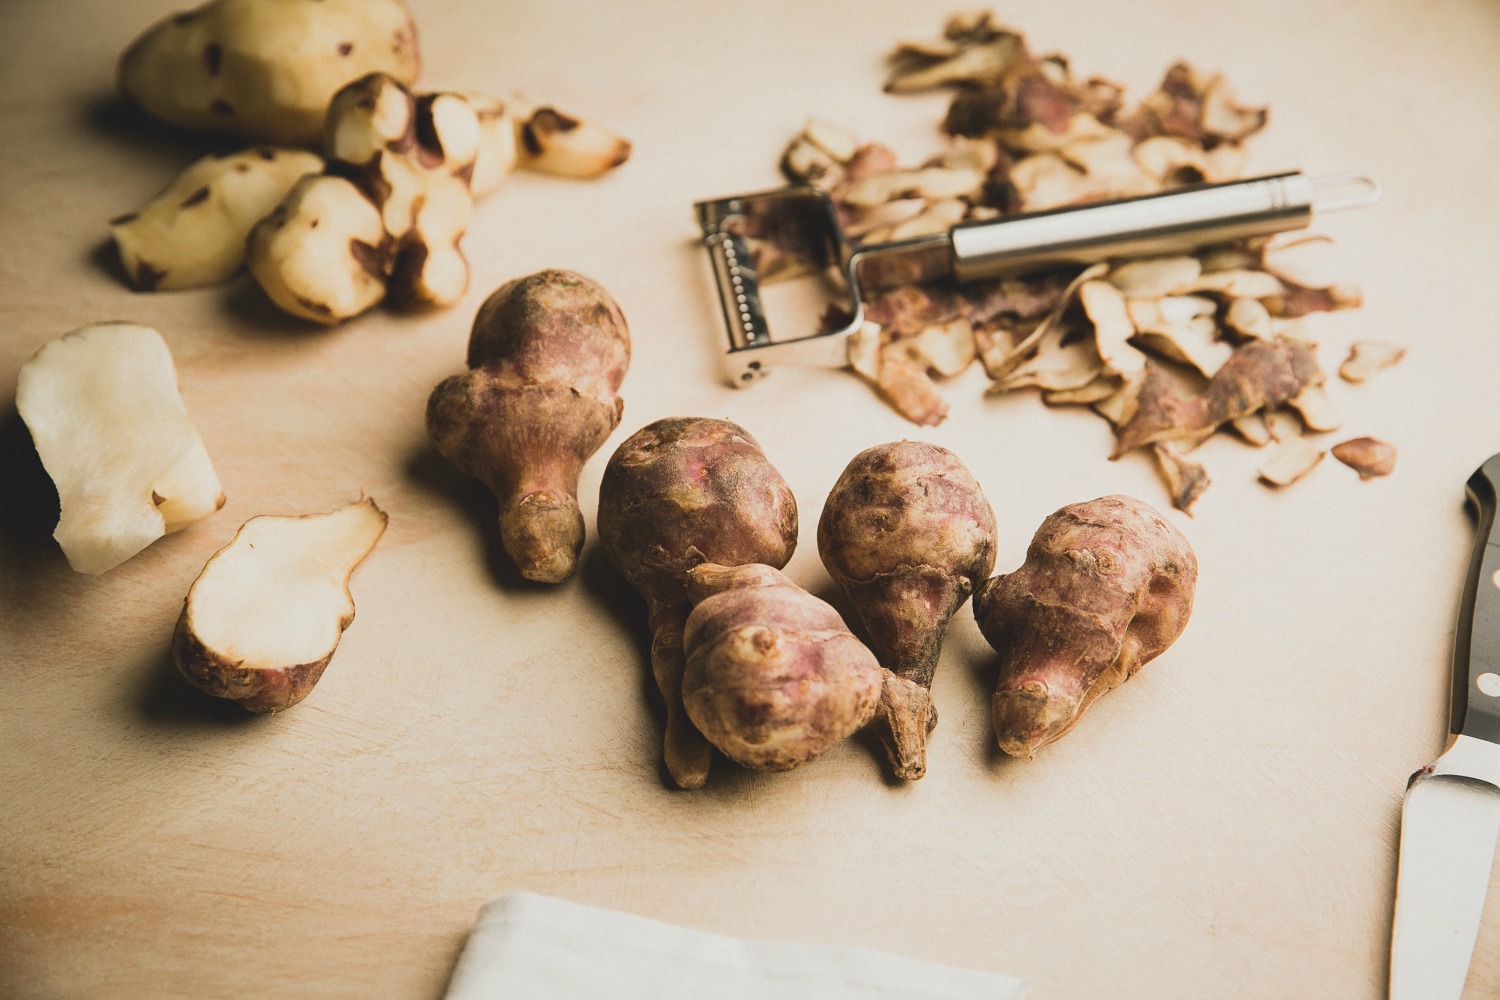 Don’t let the name deceive you, Jerusalem artichokes are artichokes in name only. 